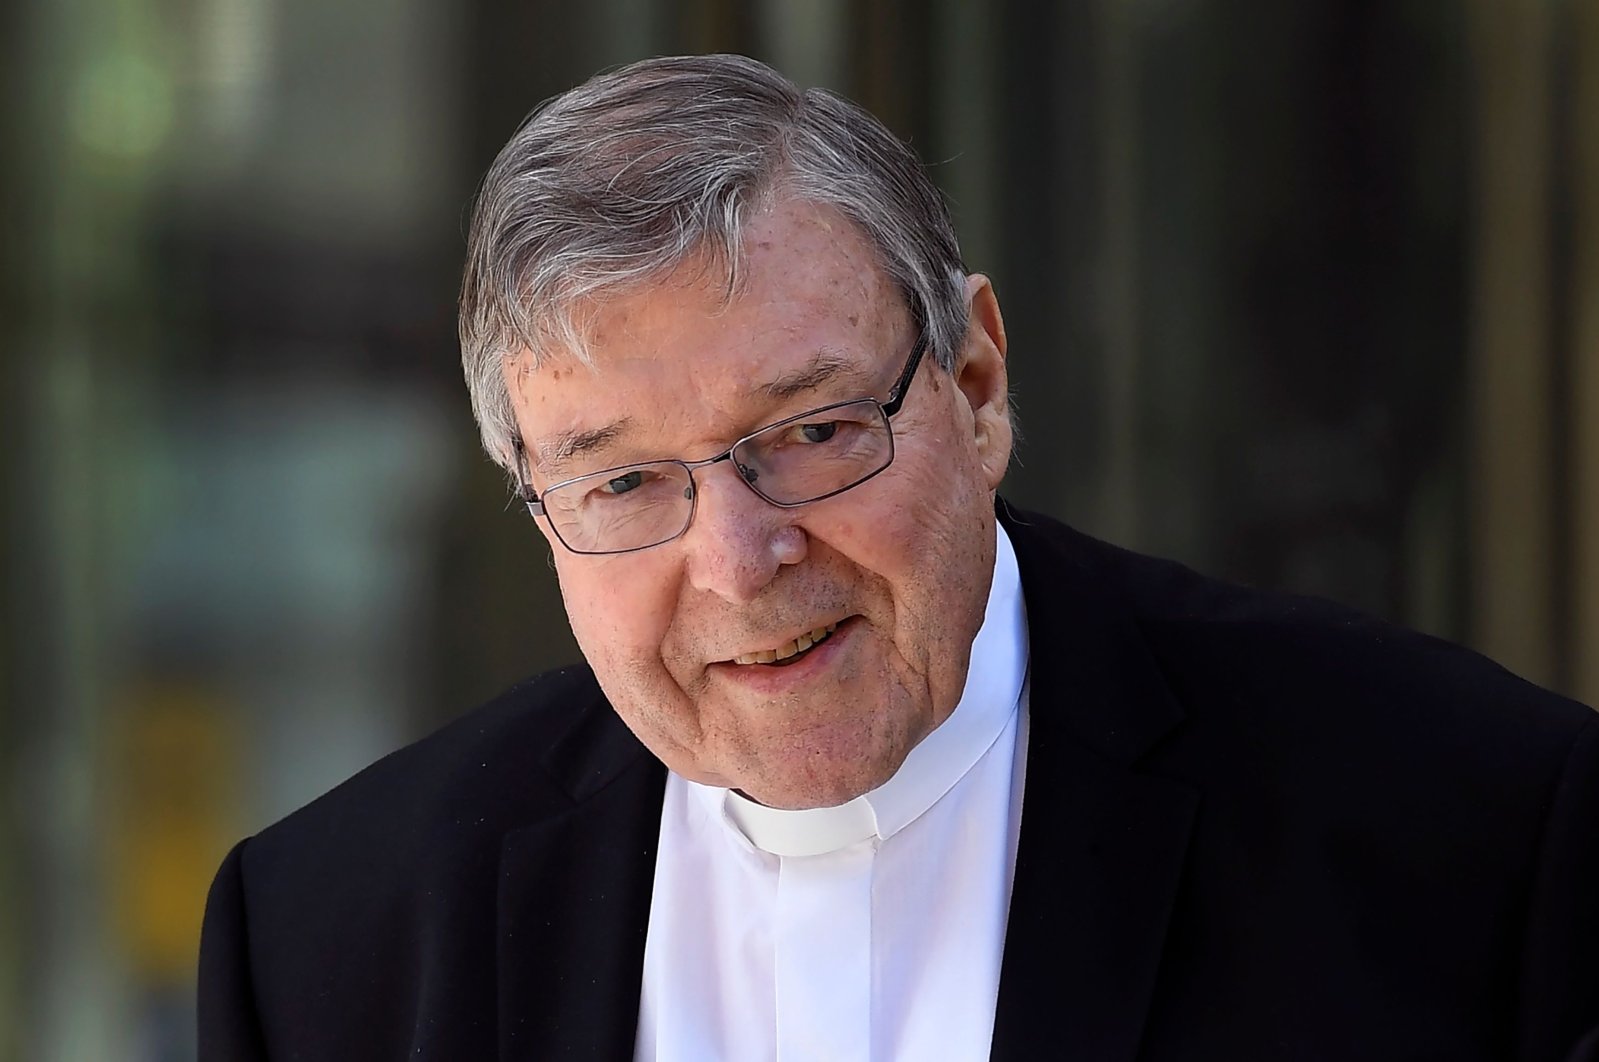 This Dec. 10, 2018, file photo shows Cardinal George Pell walking to a car in Melbourne, Australia. (AFP Photo)